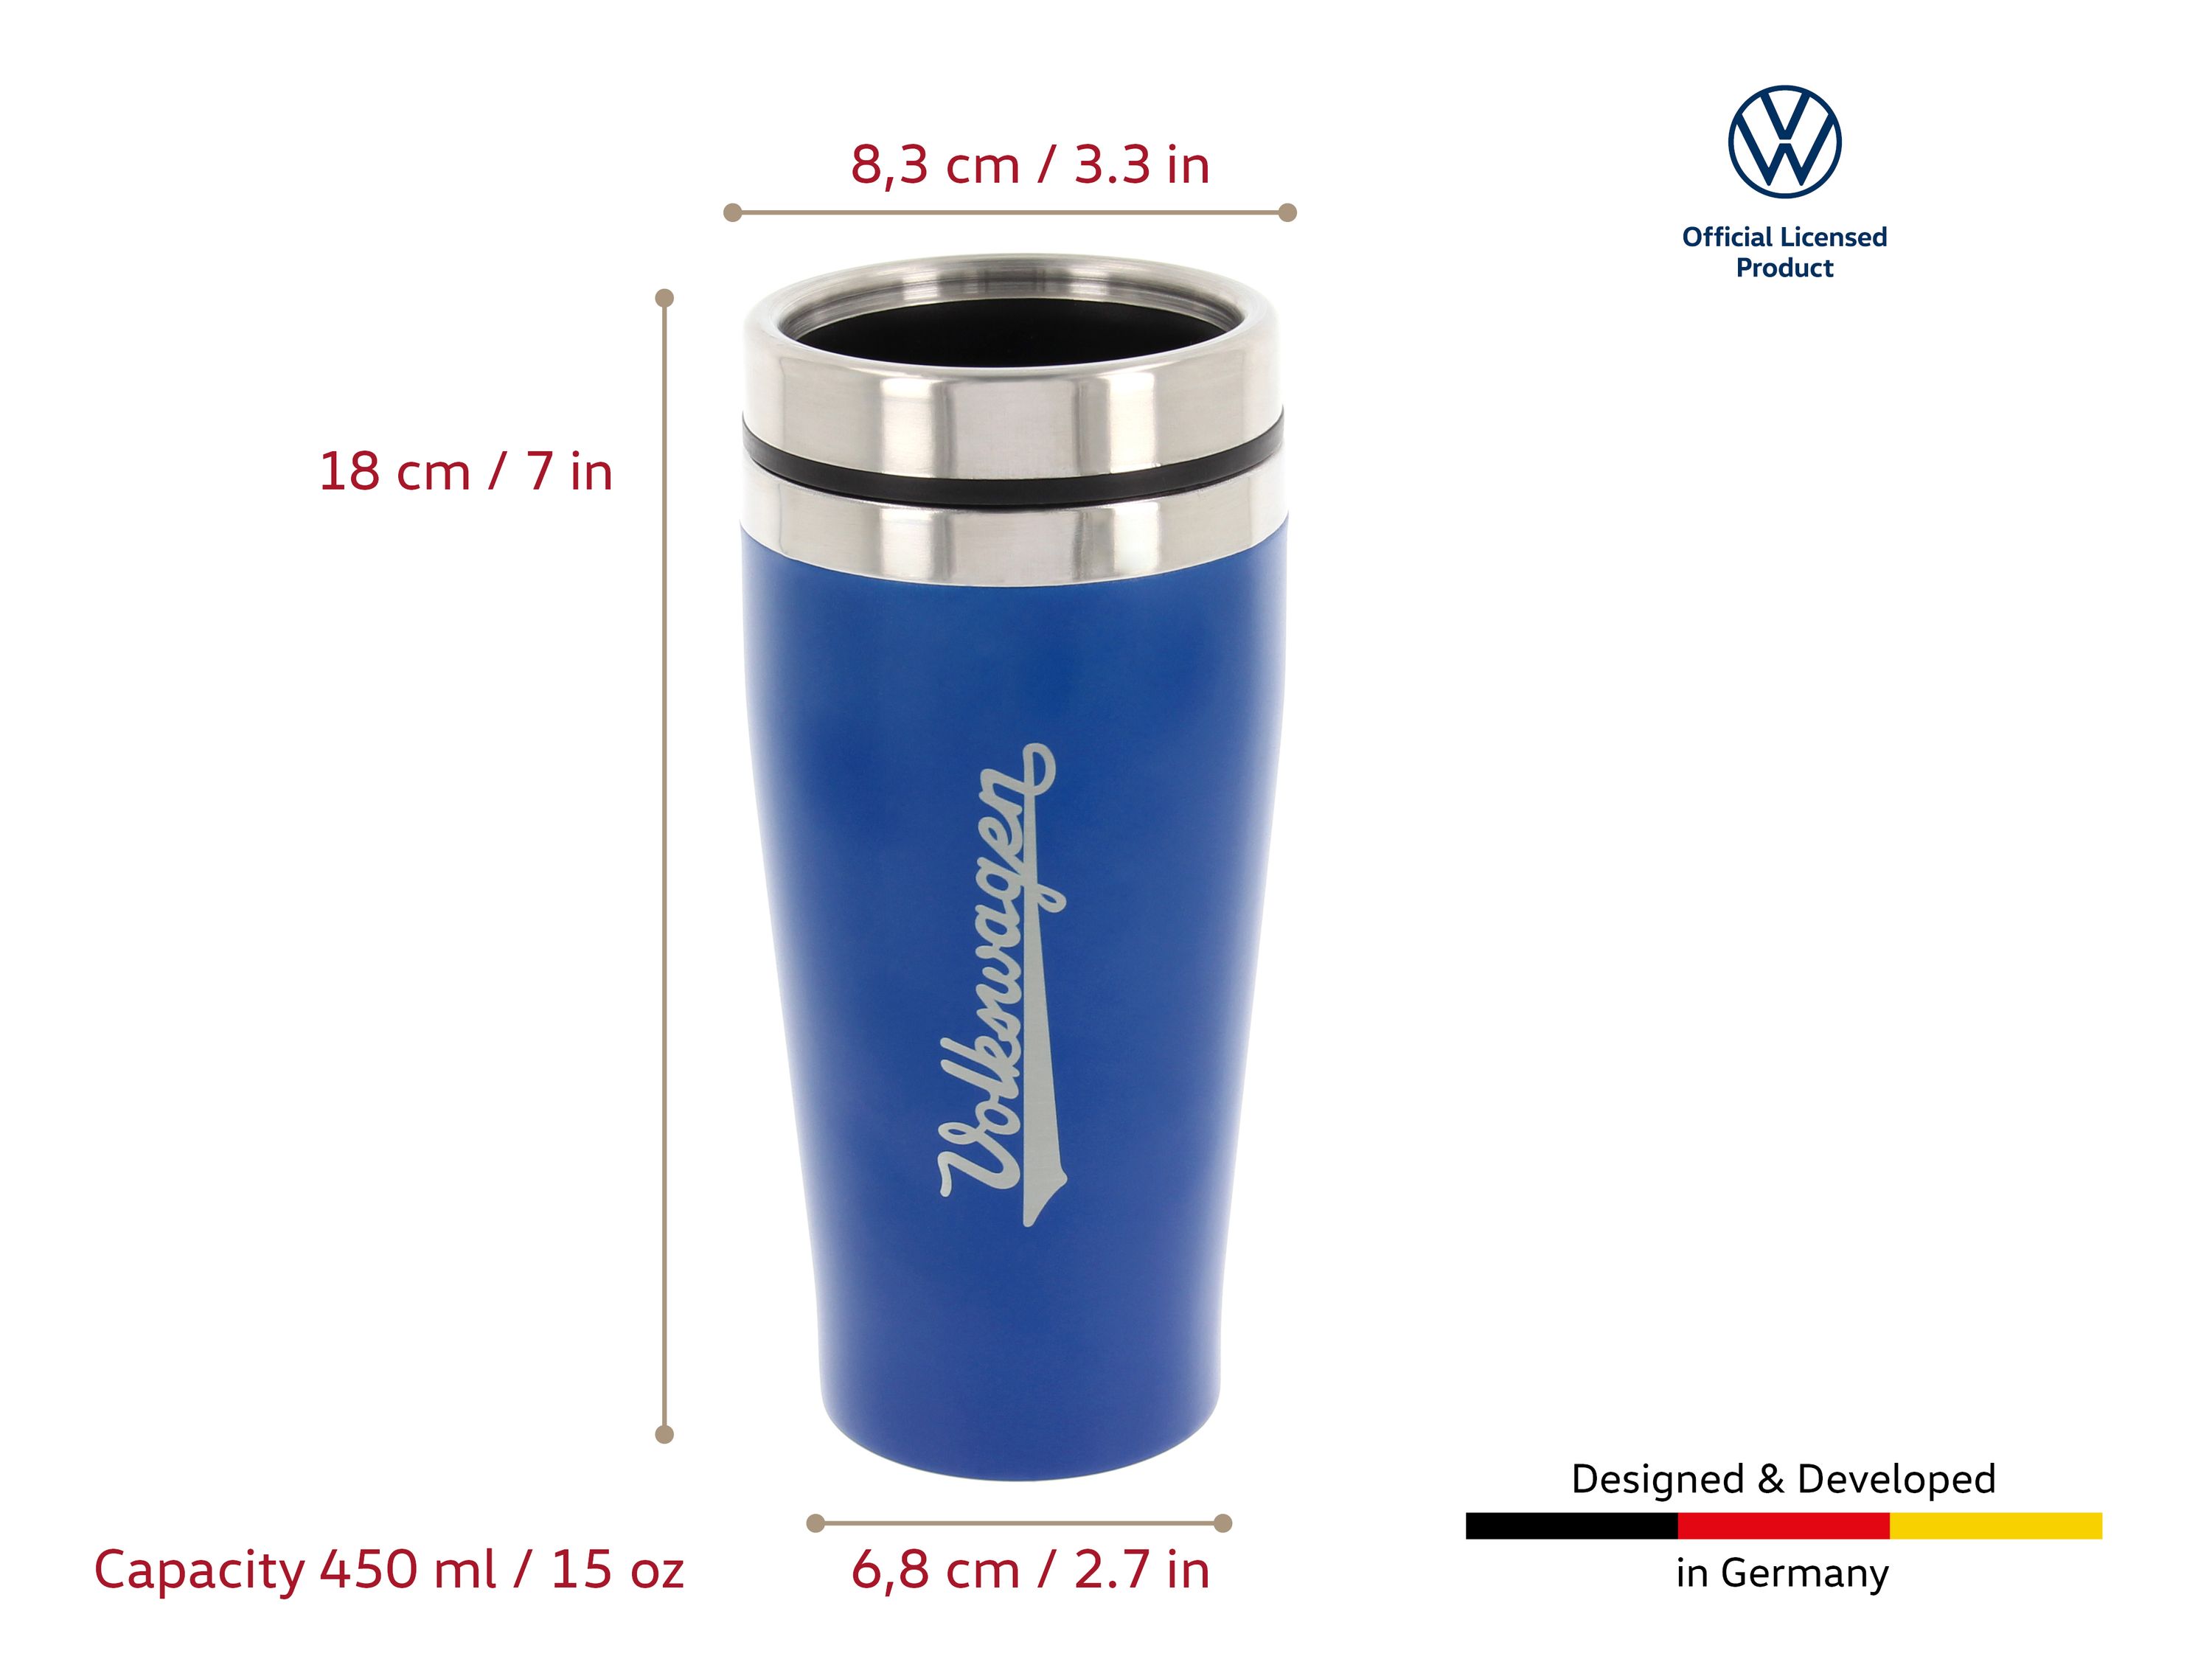 VW stainless steel thermo mug, double walled, 450ml